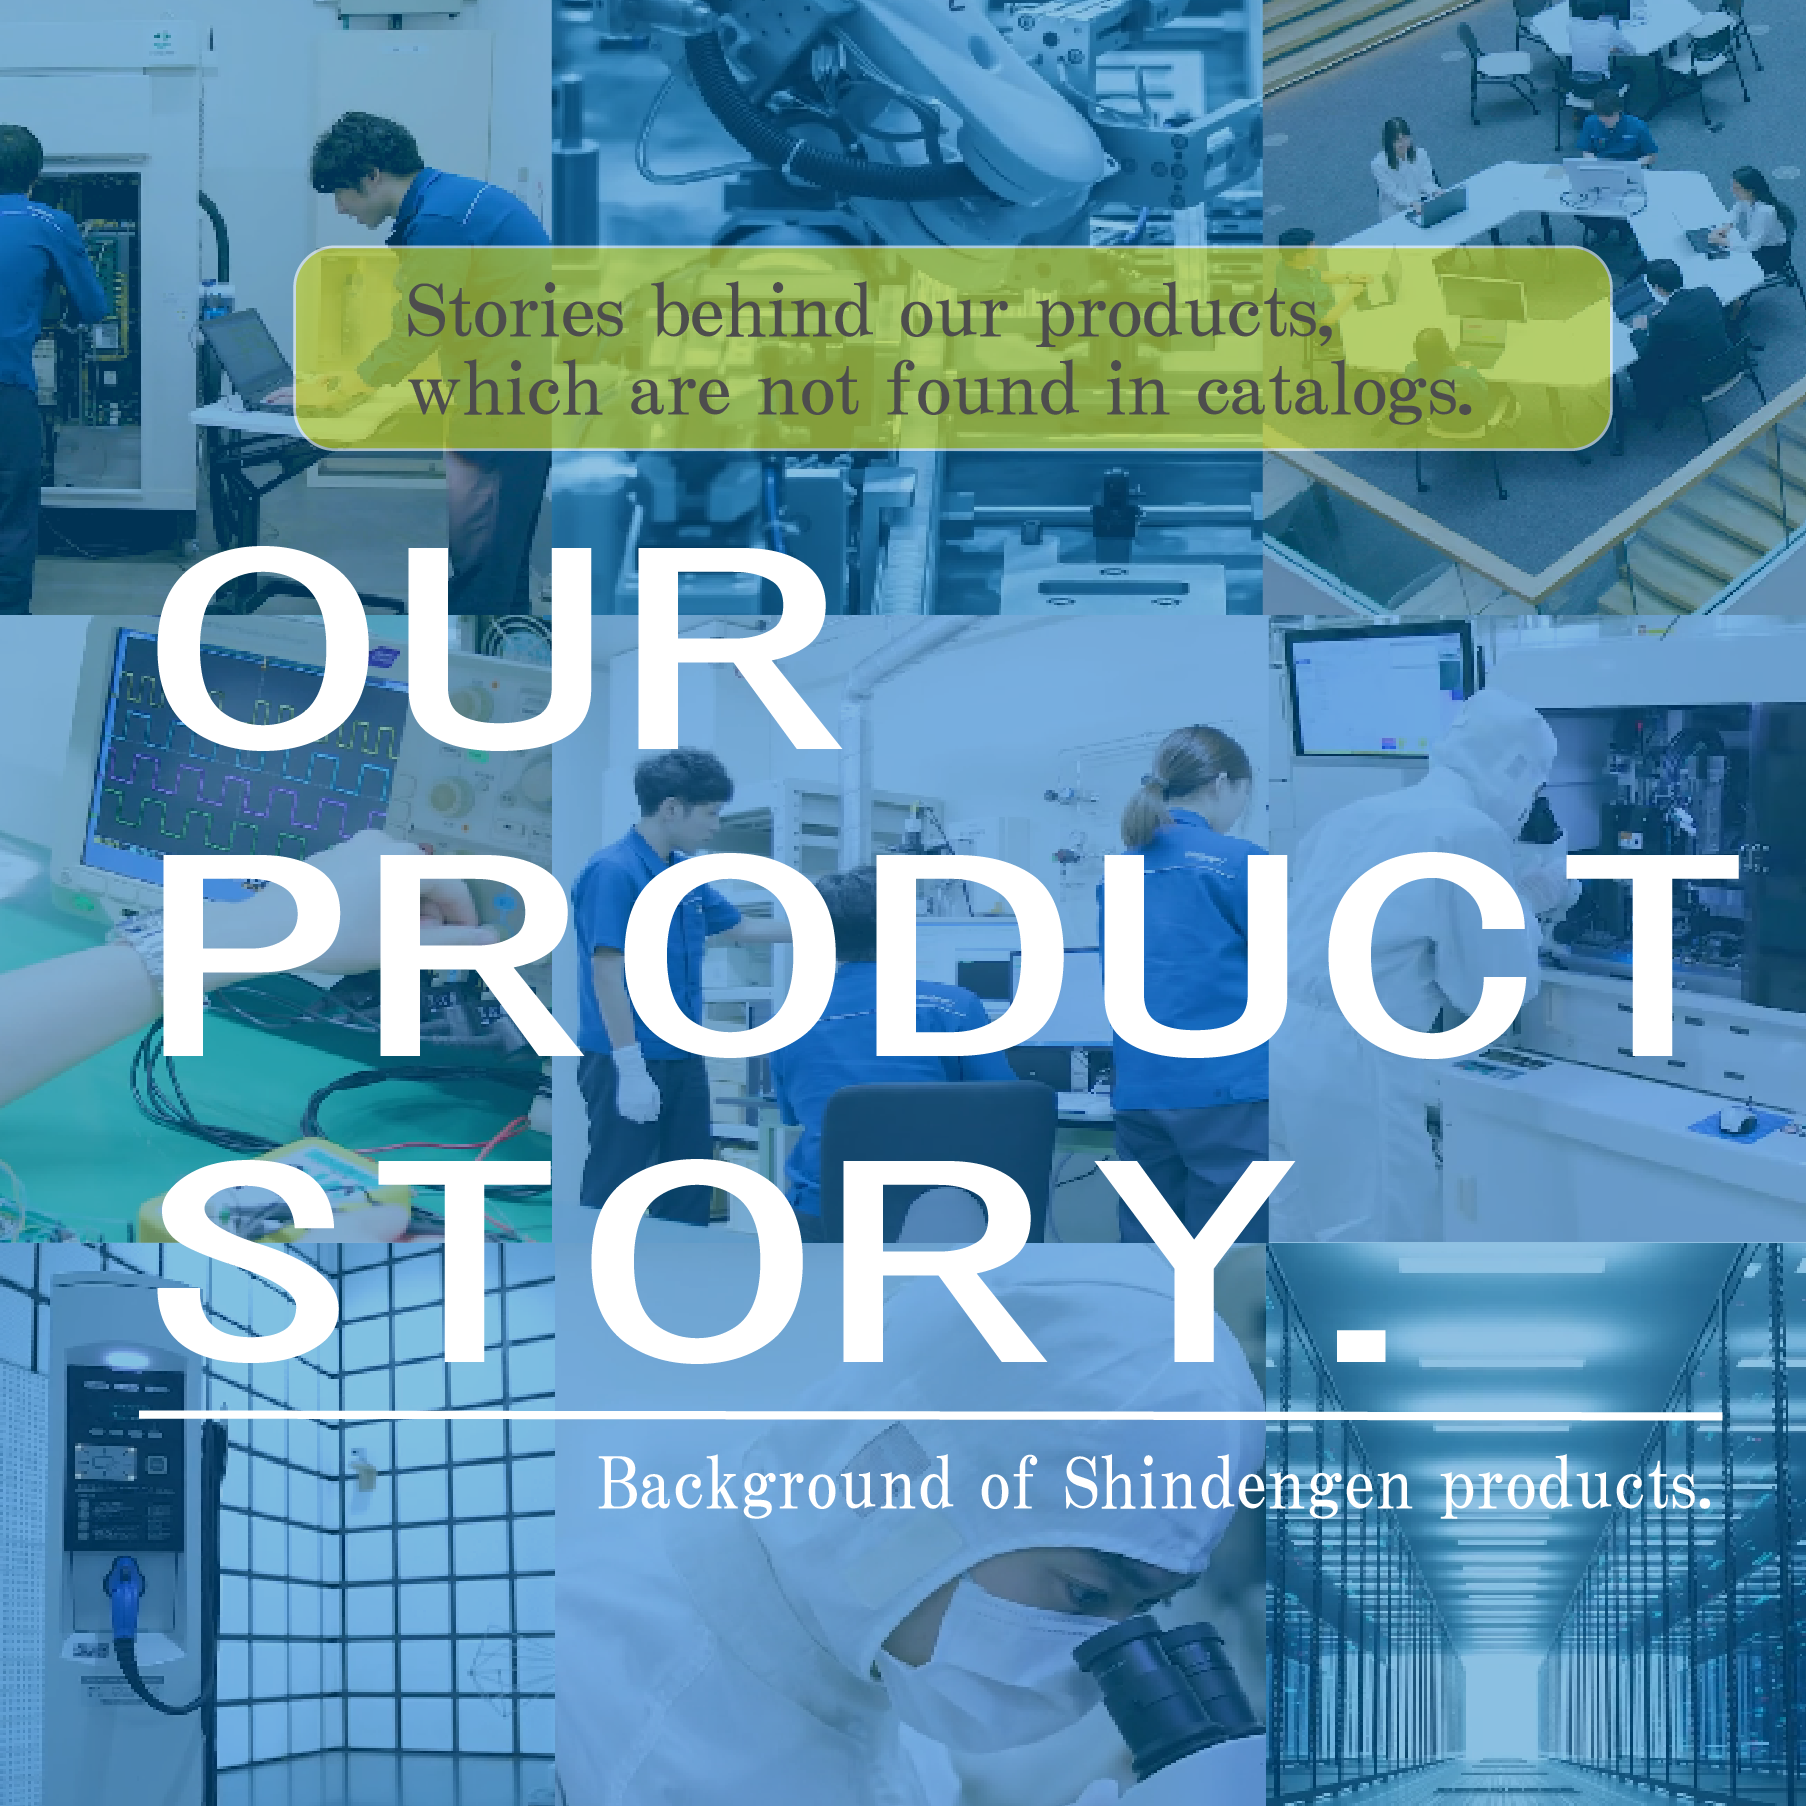 Our Product Story